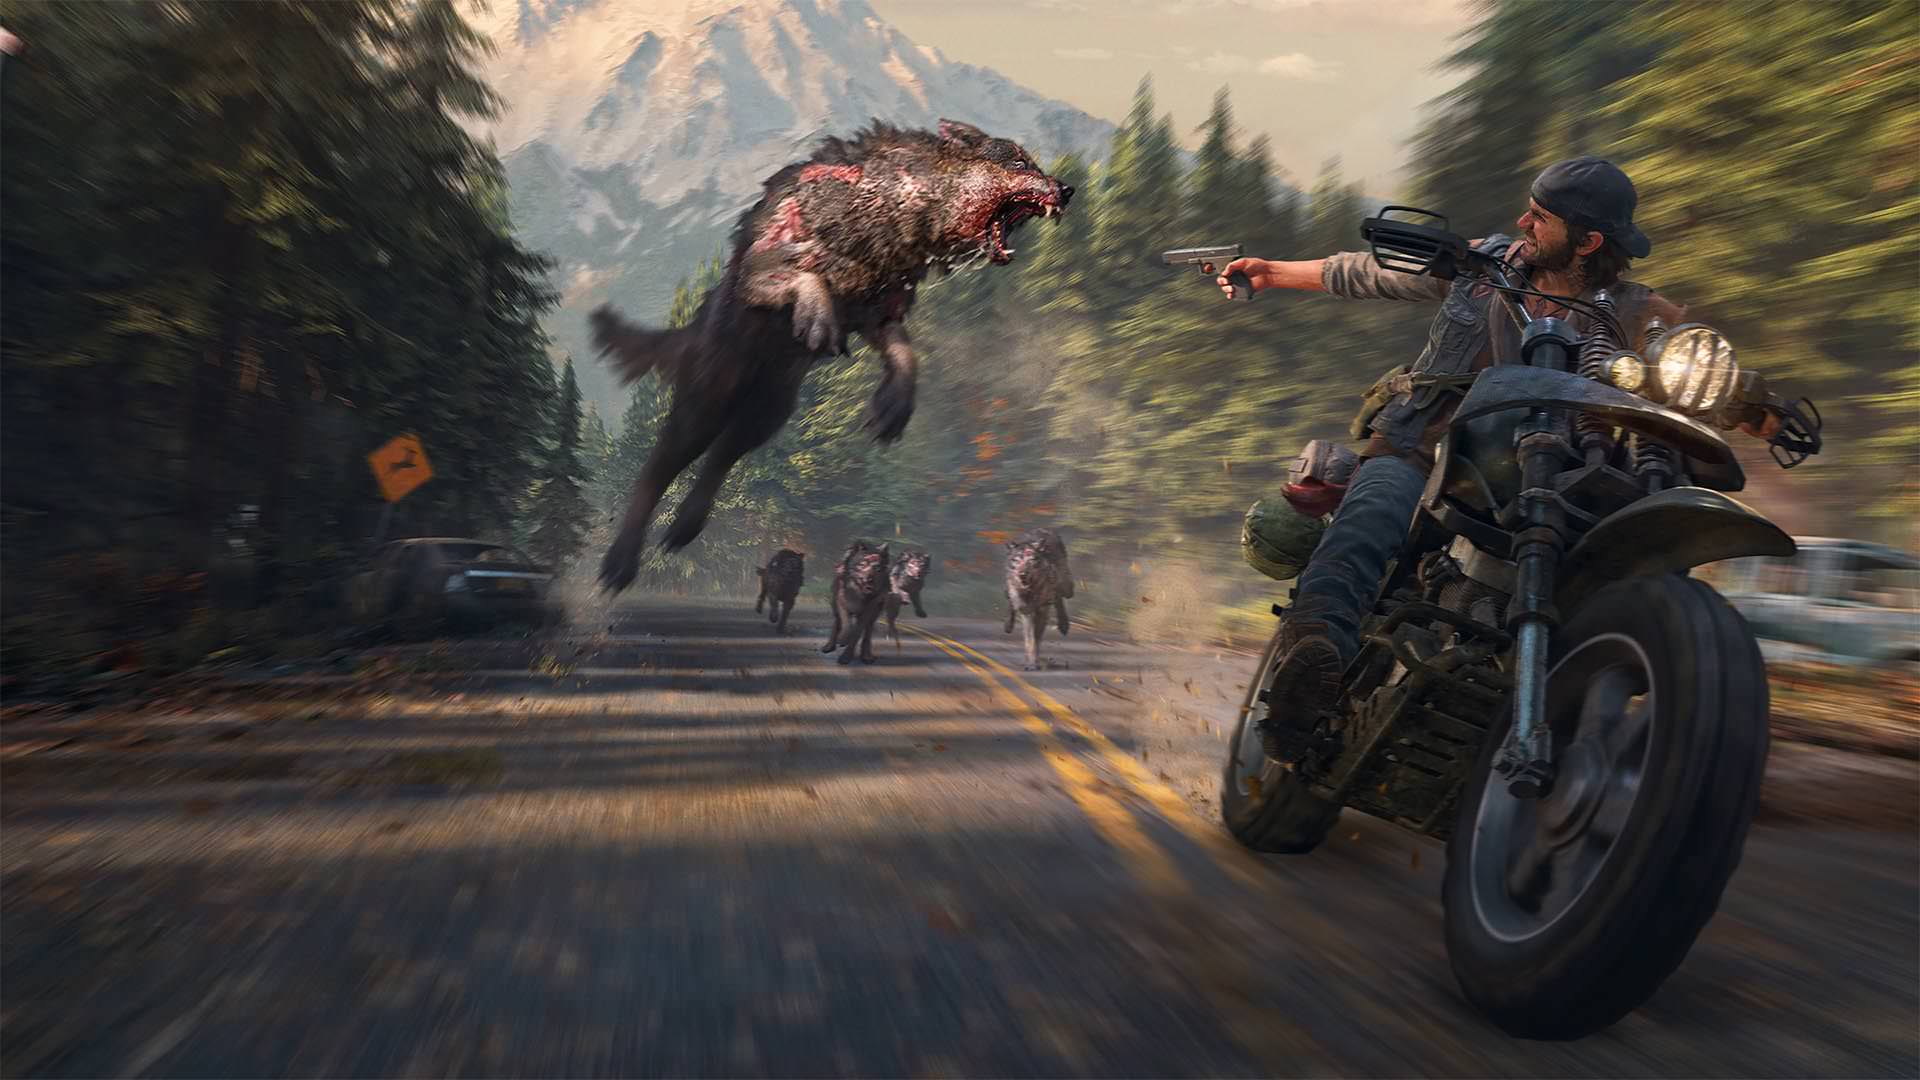 Deacon riding a motorcycle and shooting a wolf in Days Gone